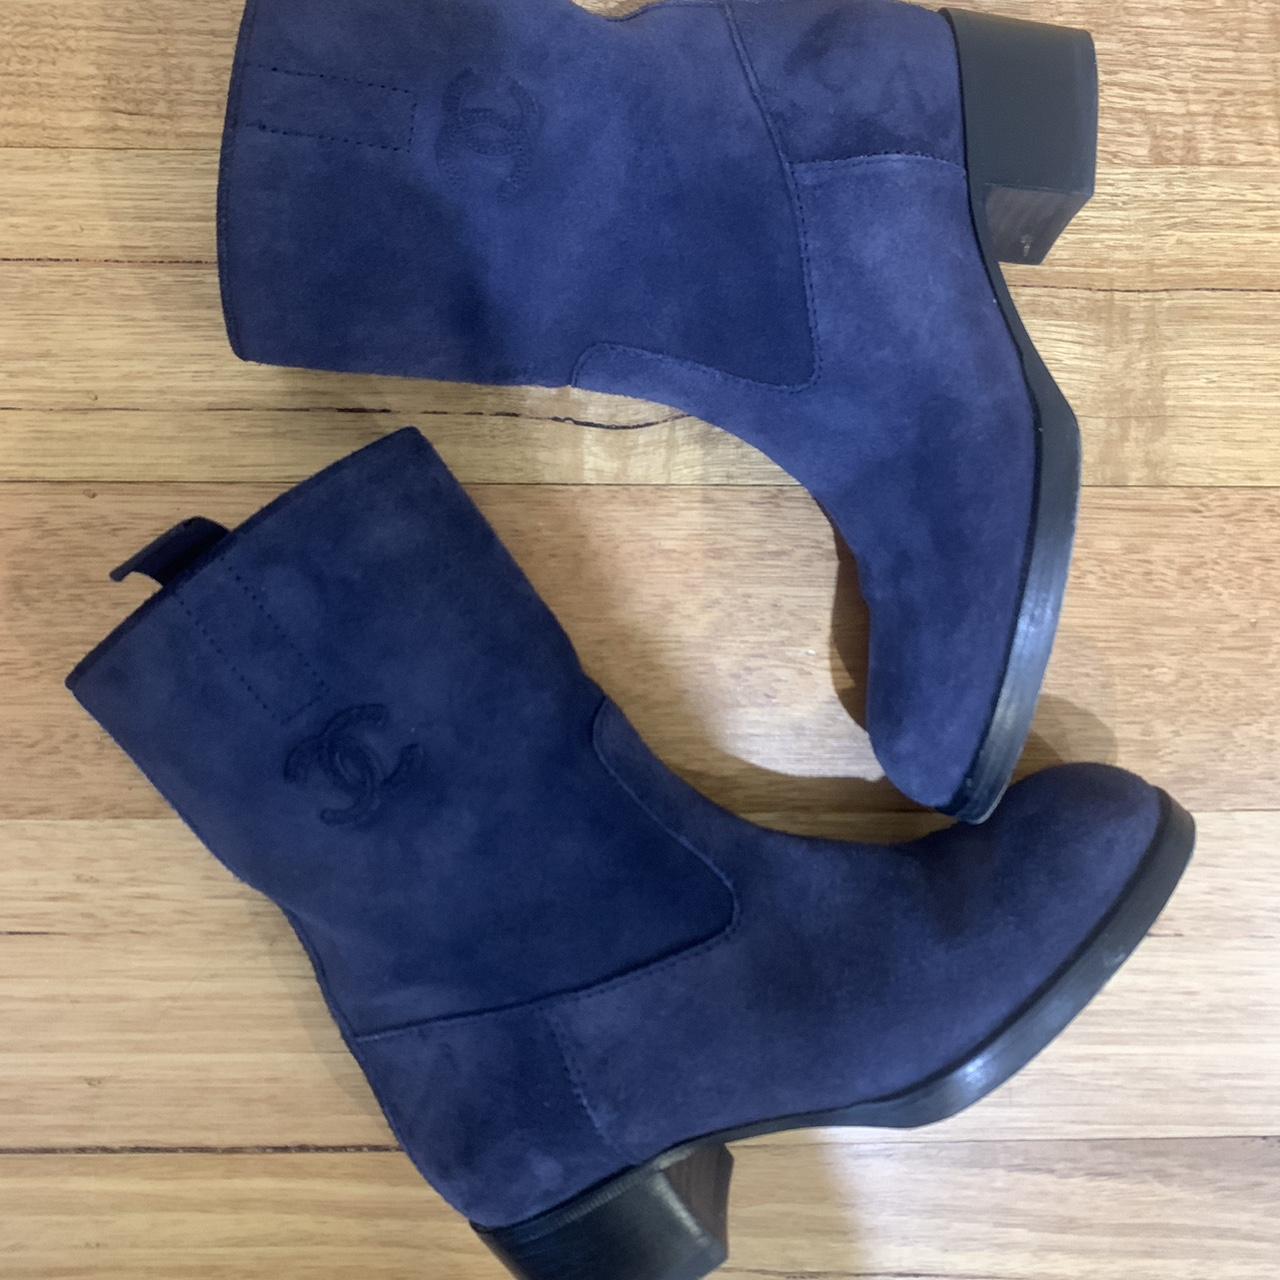 CHANEL, Shoes, Chanel Navy Blue Bootie